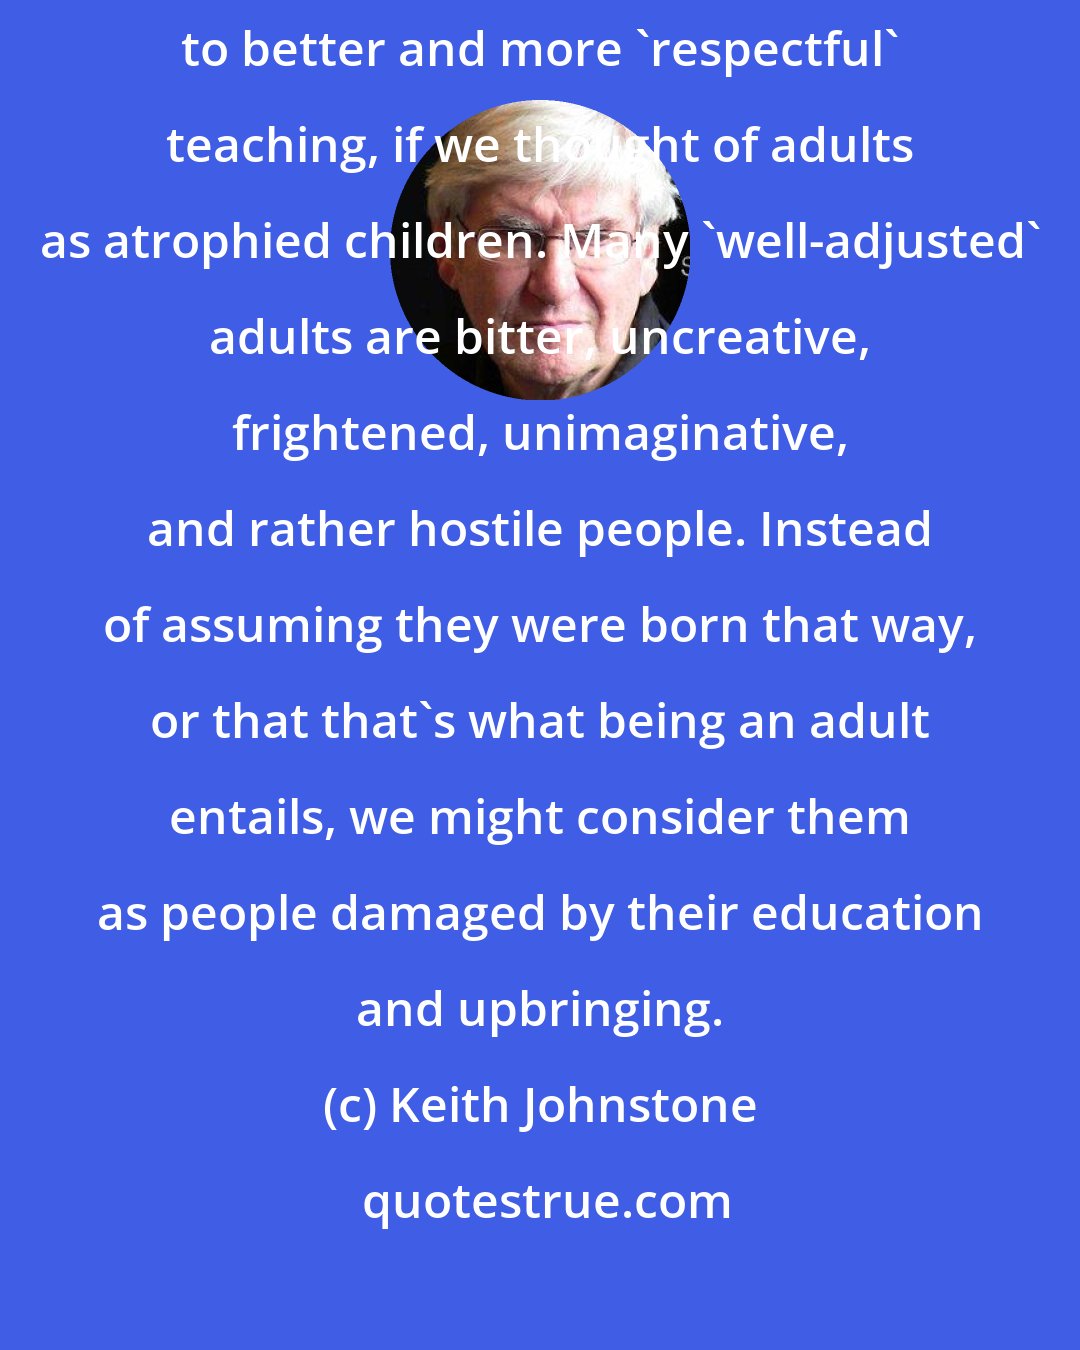 Keith Johnstone: Many teachers think of children as immature adults. It might lead to better and more 'respectful' teaching, if we thought of adults as atrophied children. Many 'well-adjusted' adults are bitter, uncreative, frightened, unimaginative, and rather hostile people. Instead of assuming they were born that way, or that that's what being an adult entails, we might consider them as people damaged by their education and upbringing.